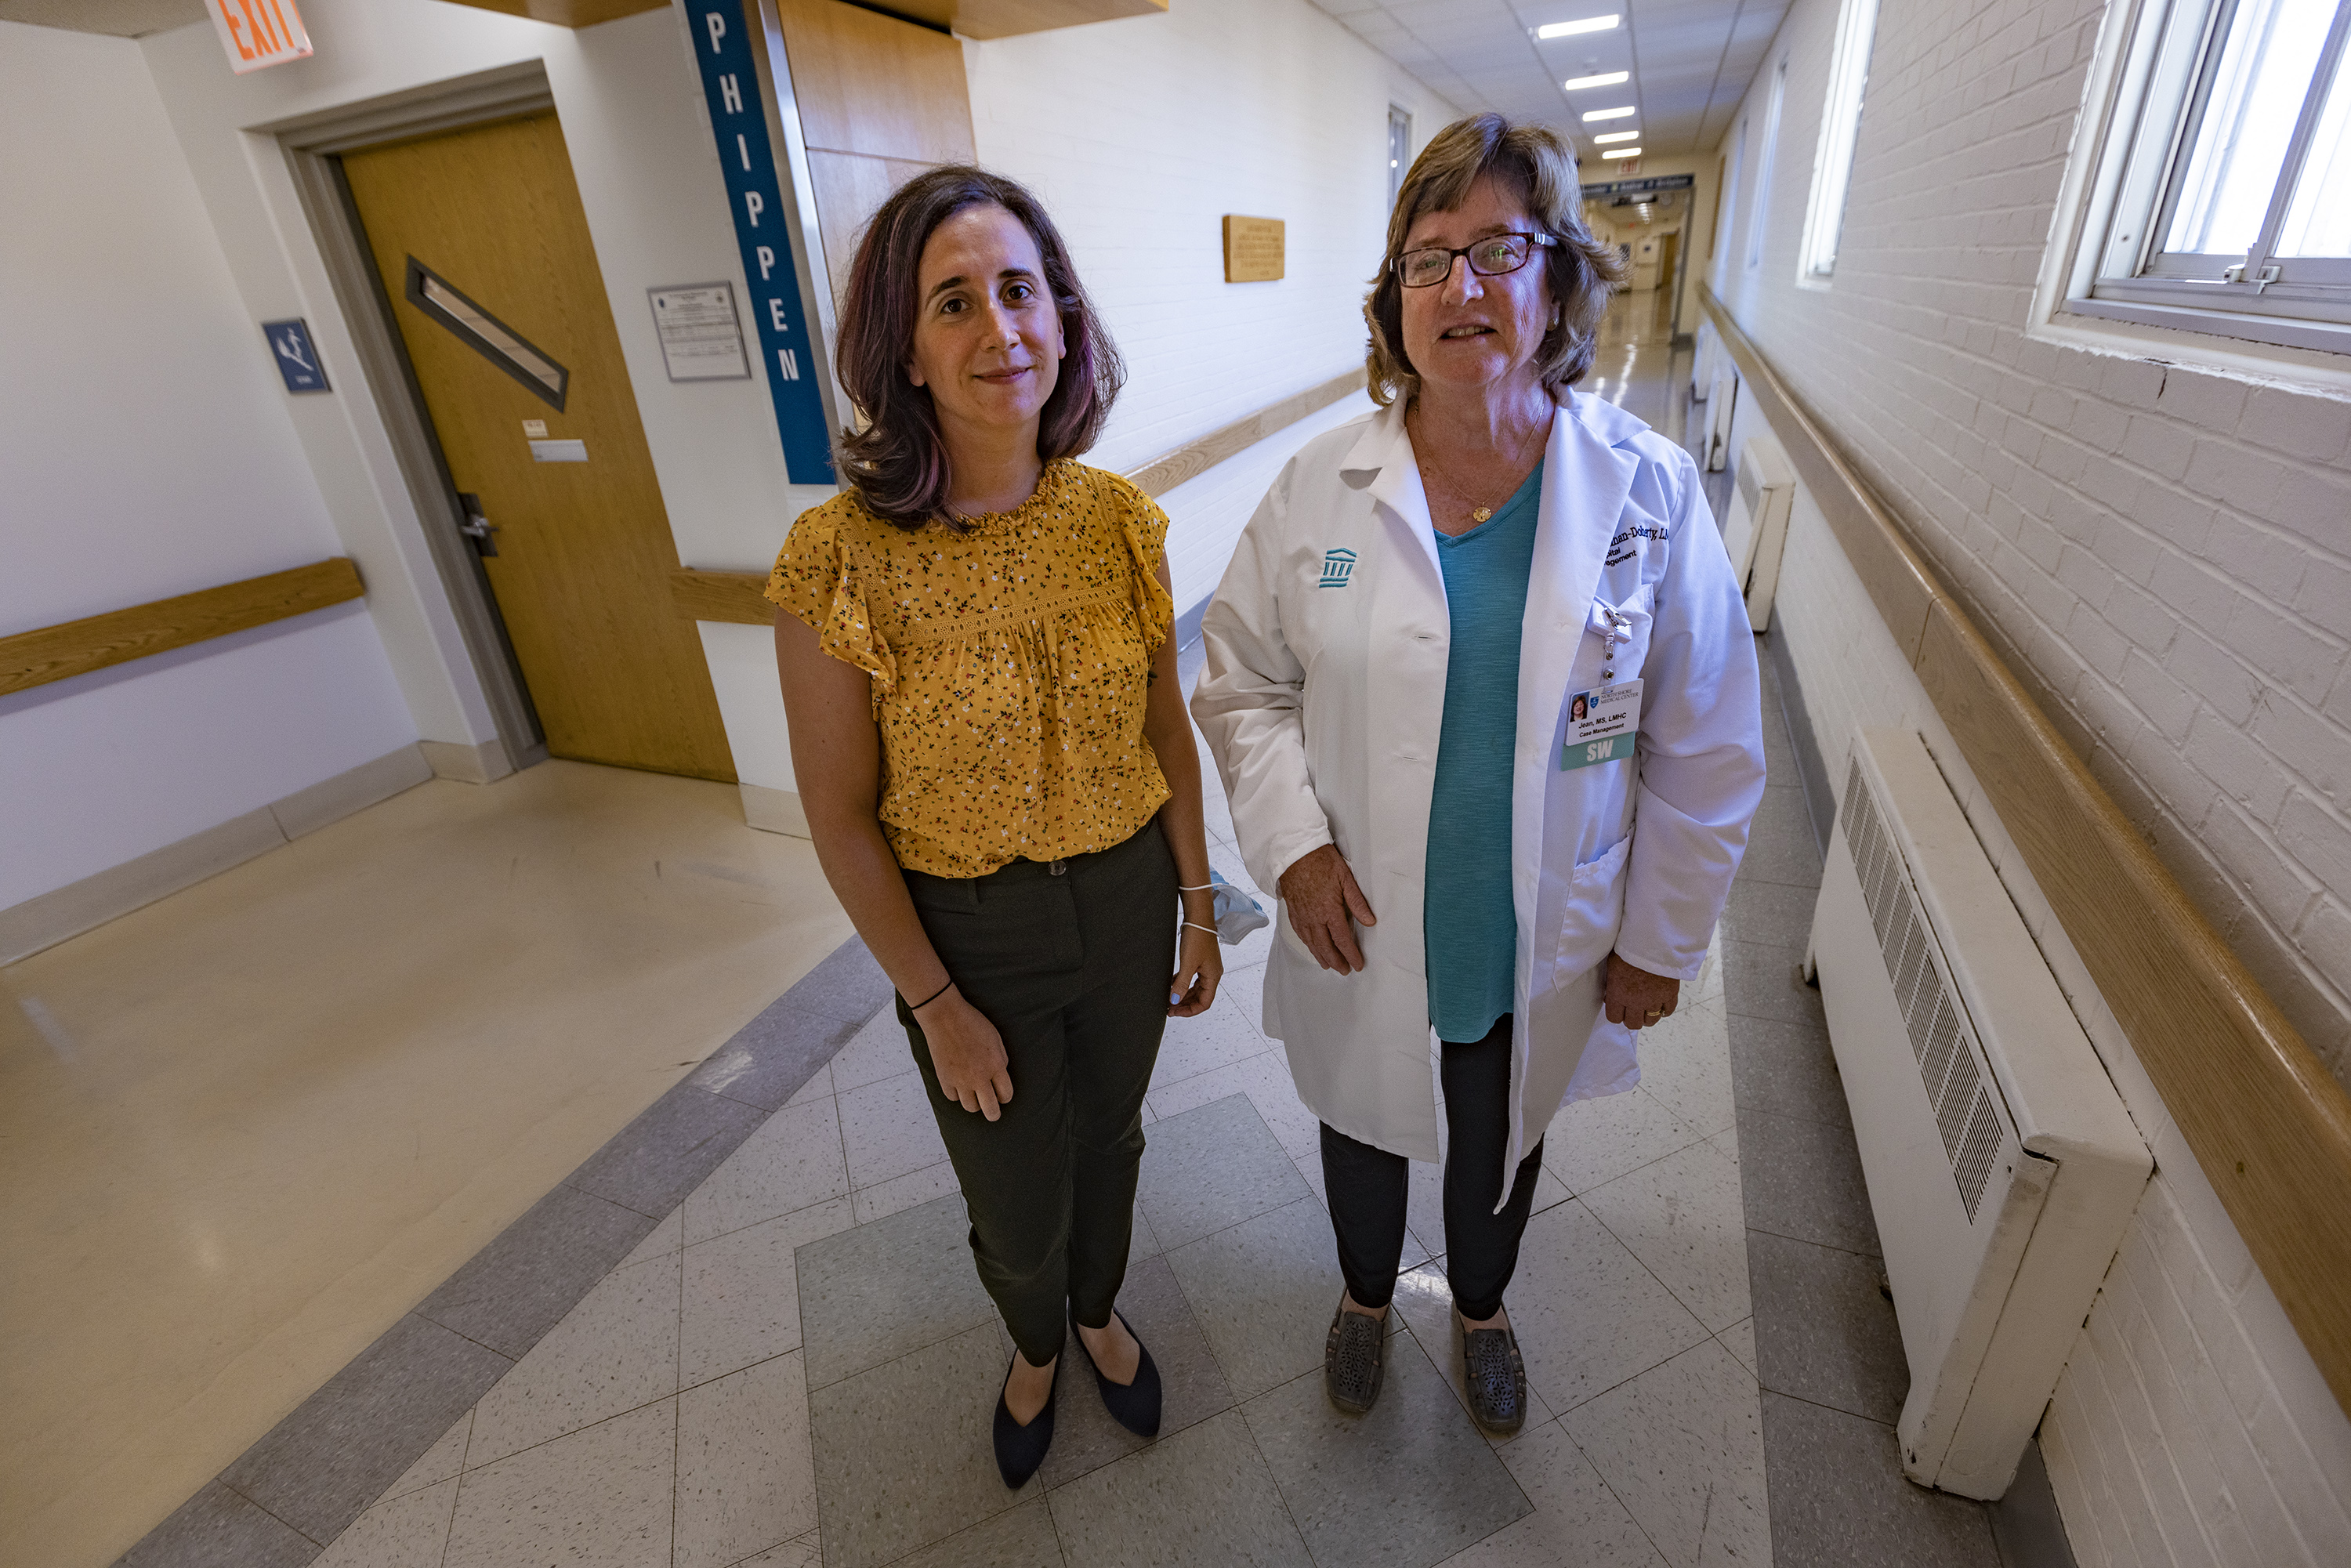 A photo shows Liz Tadie and Jean Monahan-Doherty standing together inside of a hospital.